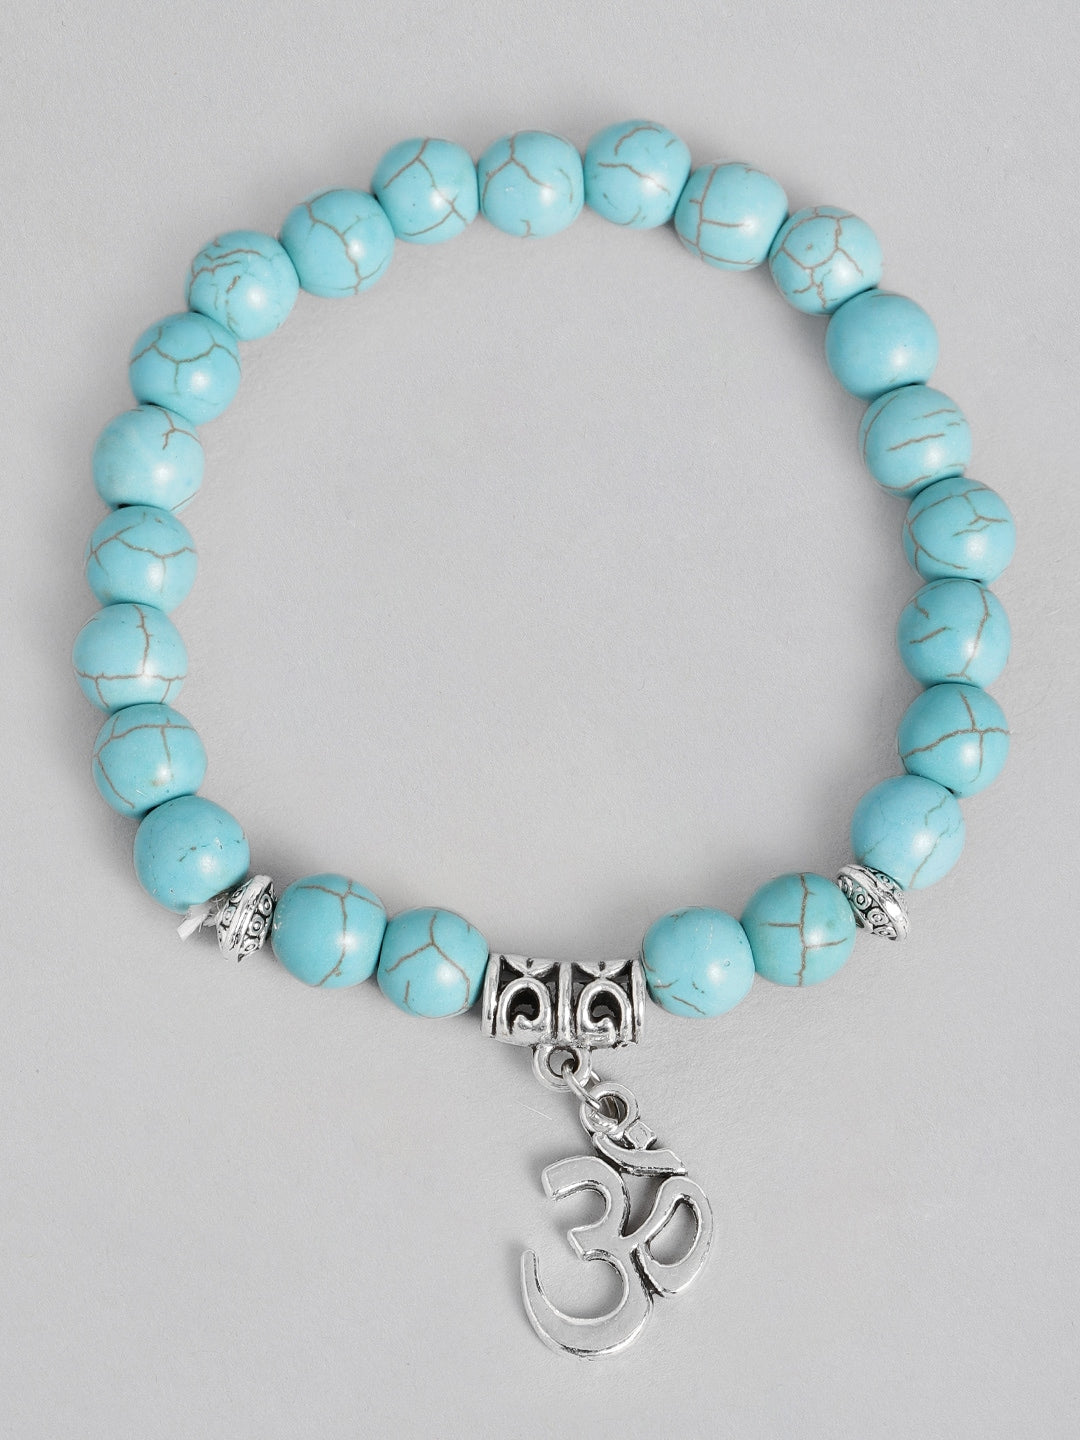 EL REGALO Men Turquoise Blue & Silver-Toned Handcrafted Om Elasticated Charm Bracelet - for Men
Style ID: 16186548